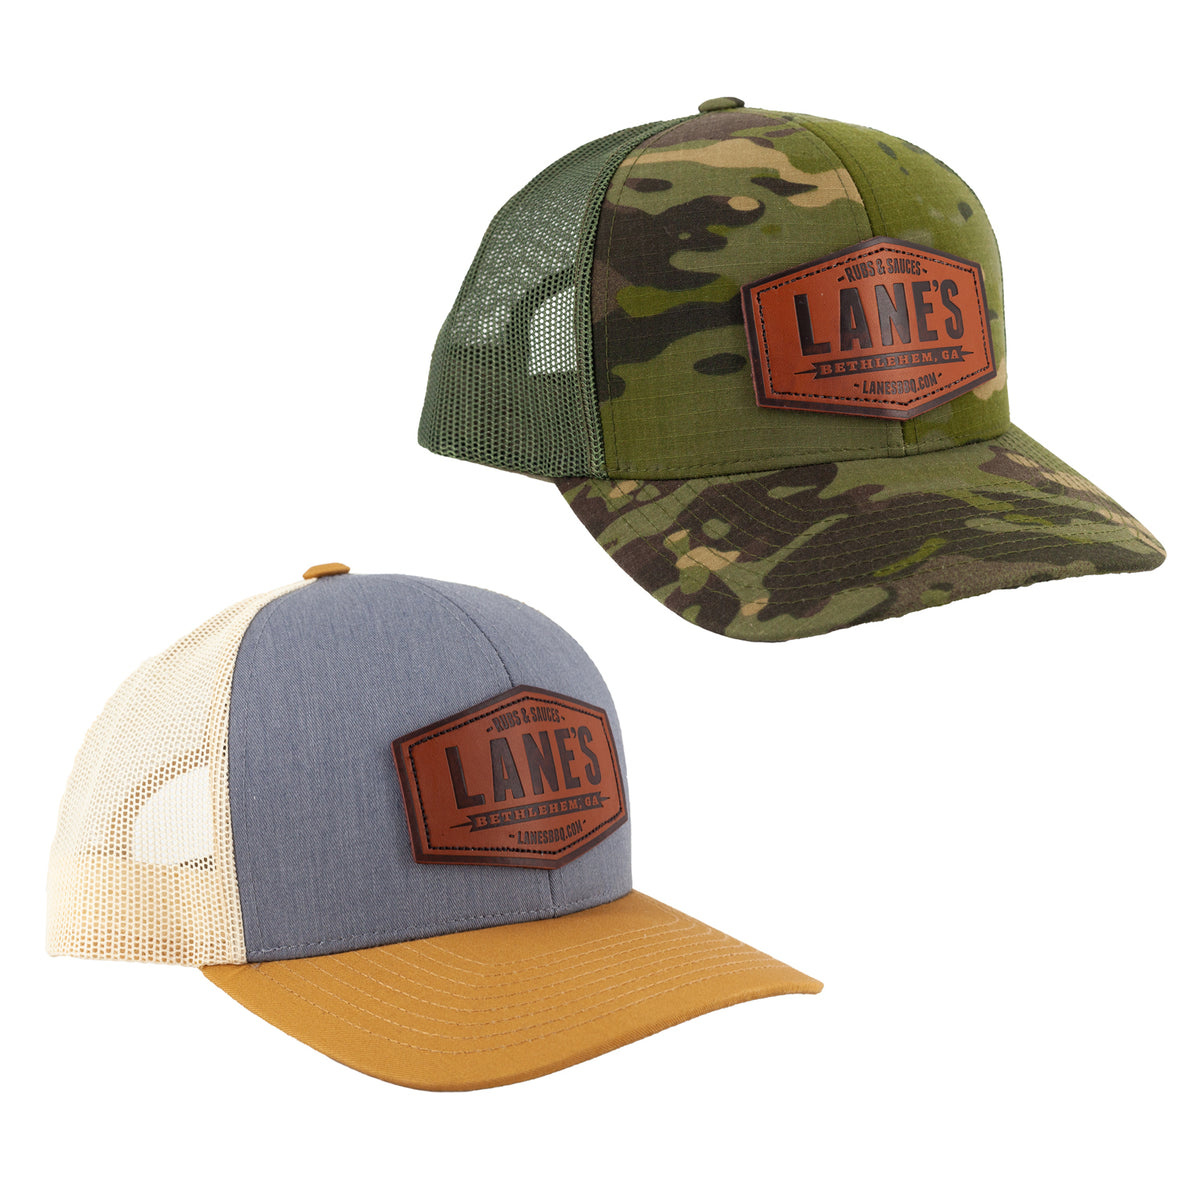 The Just Pass'N Through camo leather patch hat